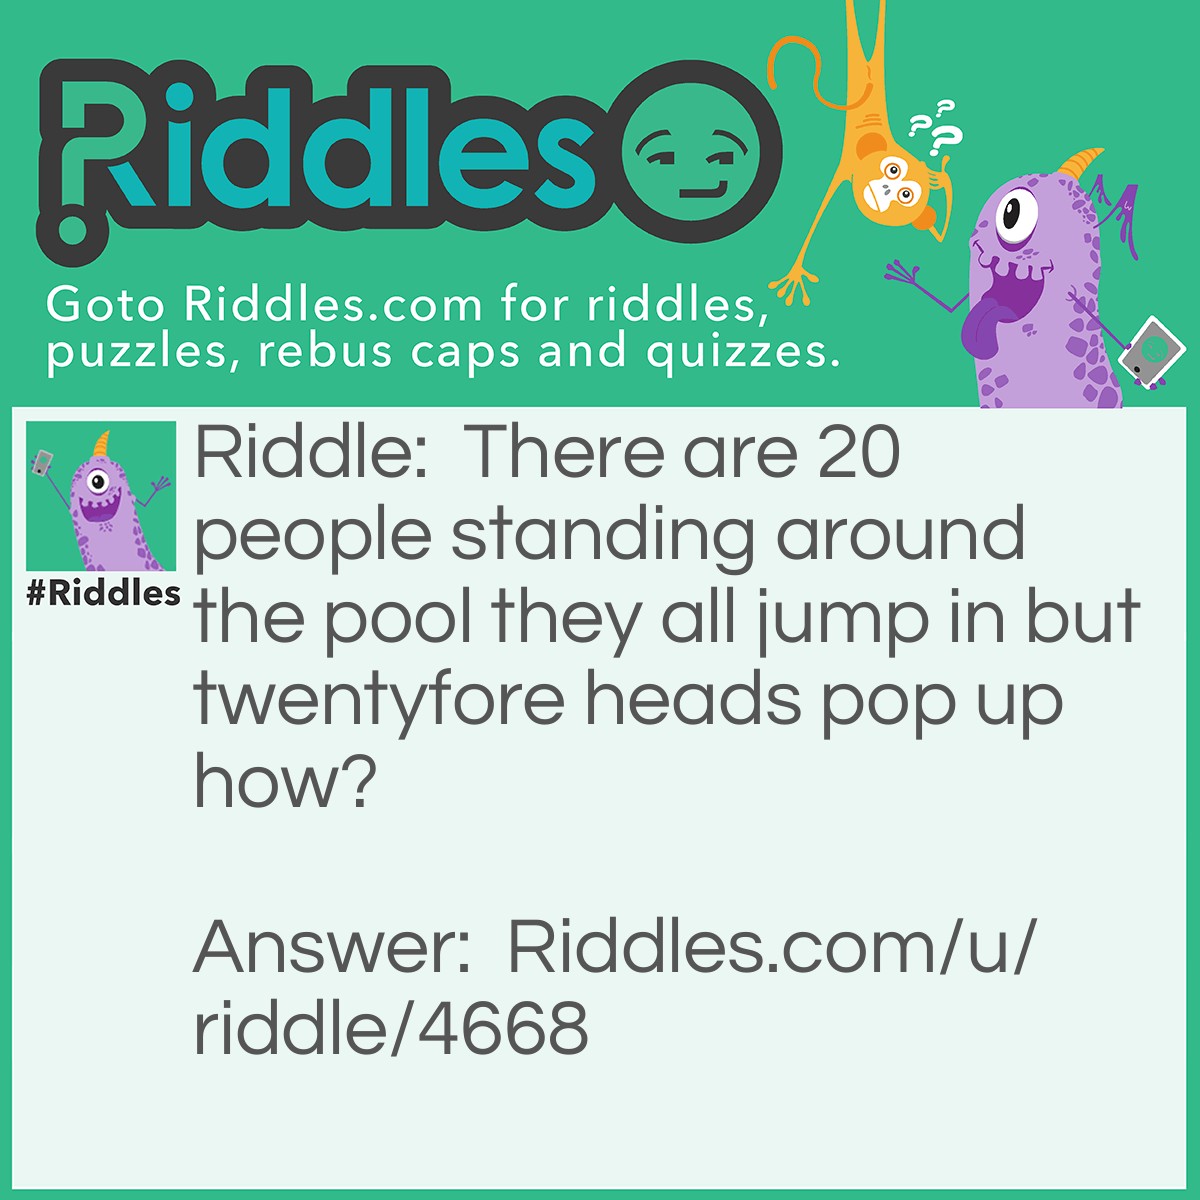 Riddle: There are 20 people standing around the pool they all jump in but twentyfore heads pop up how? Answer: Twenty fore heads.